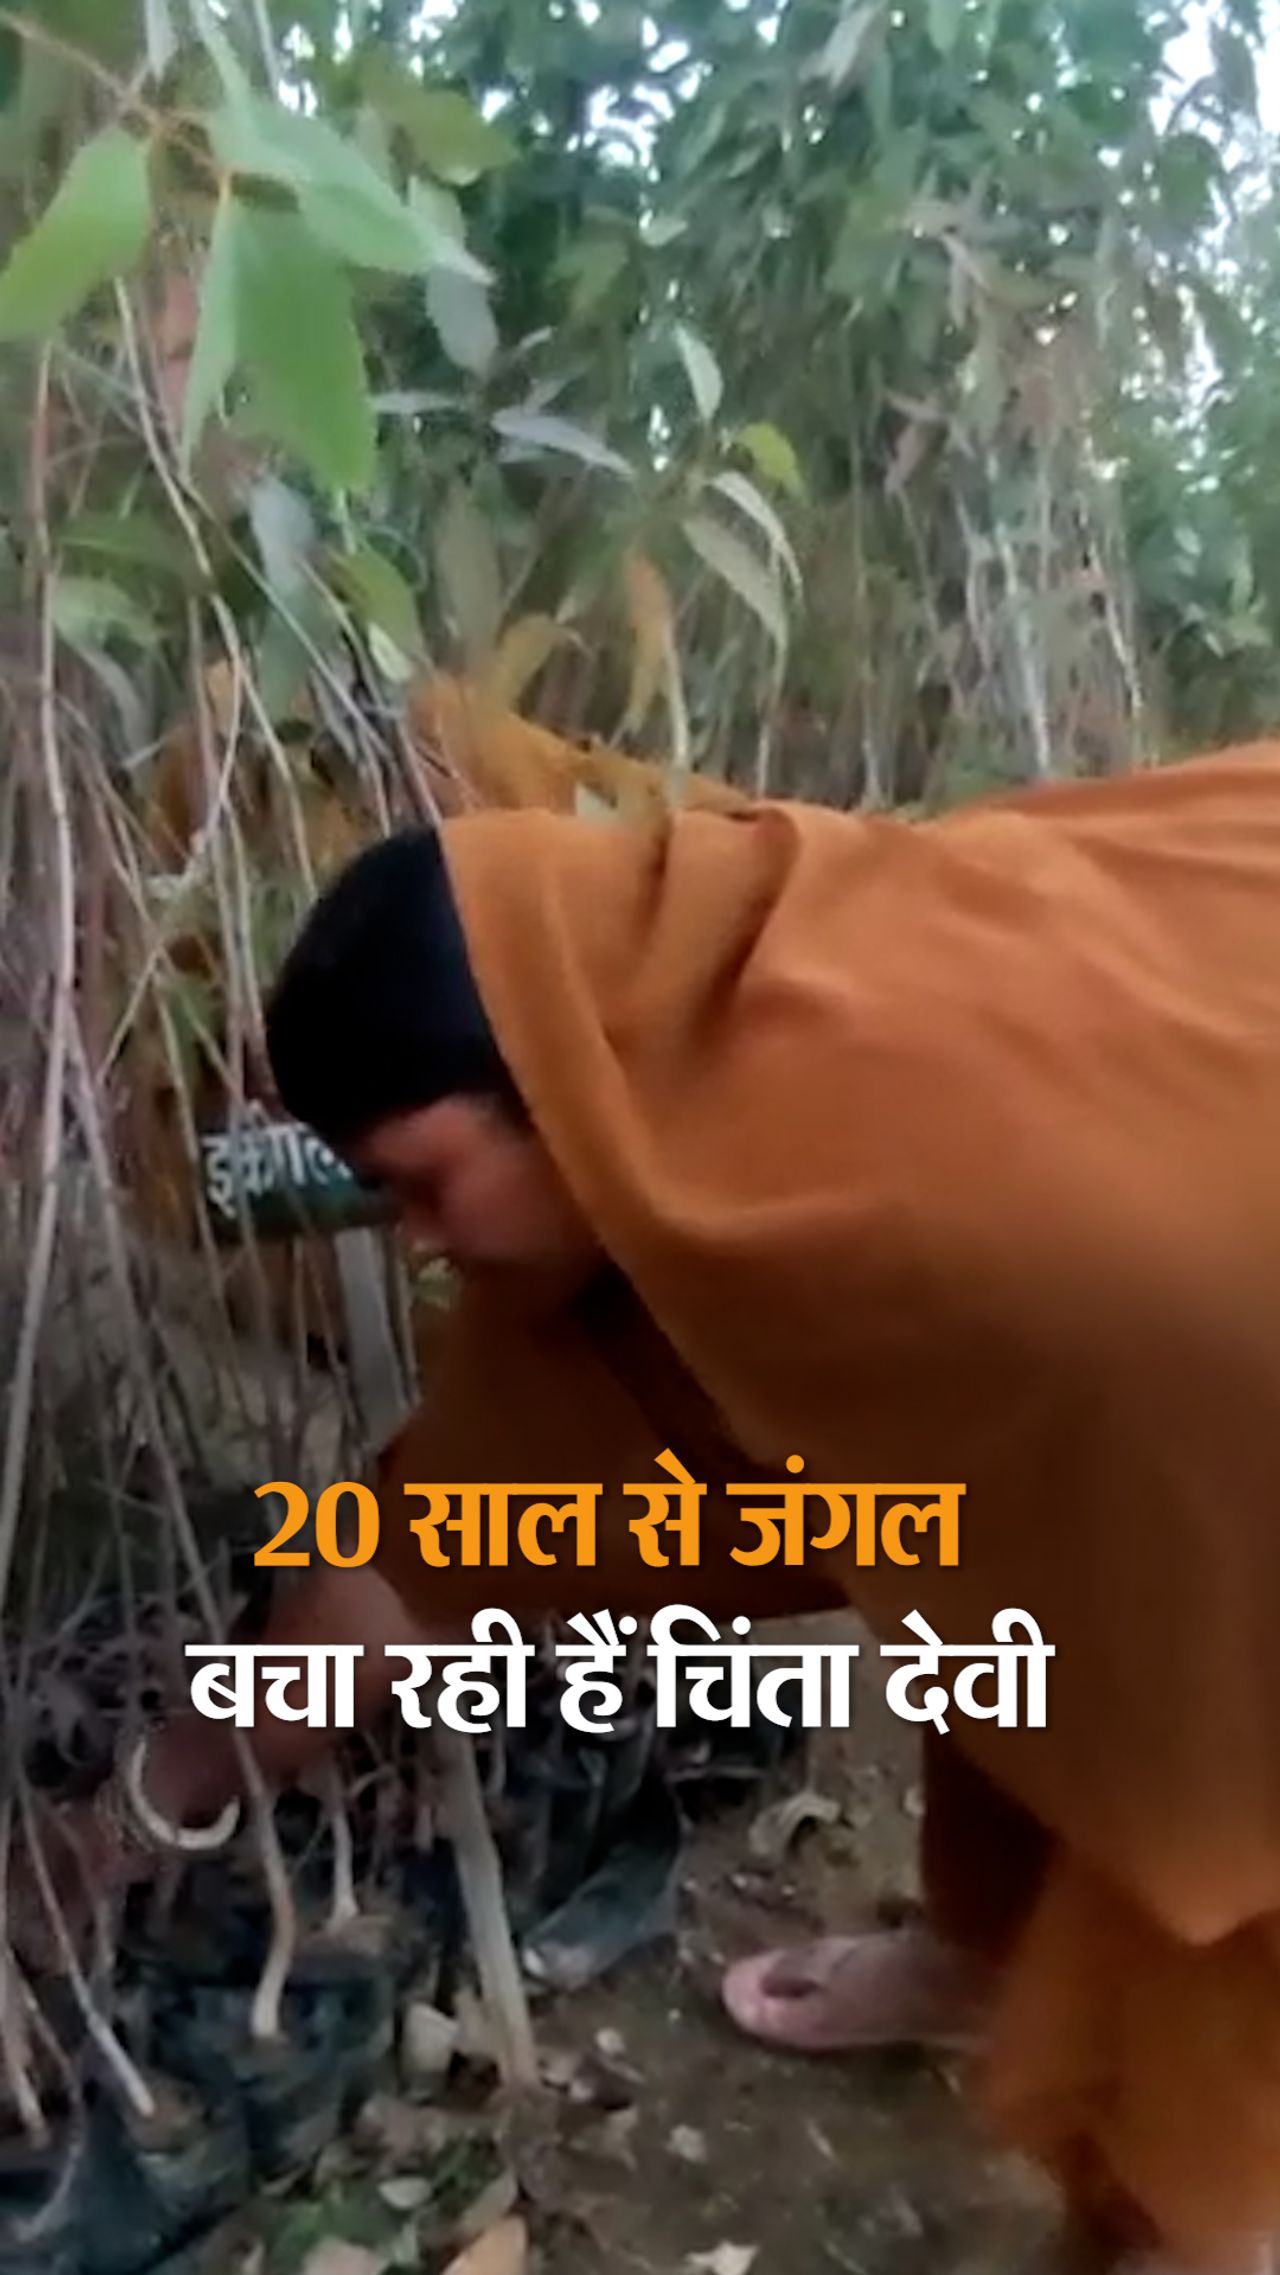 Chinta Devi works to protect the environment and save wildlife